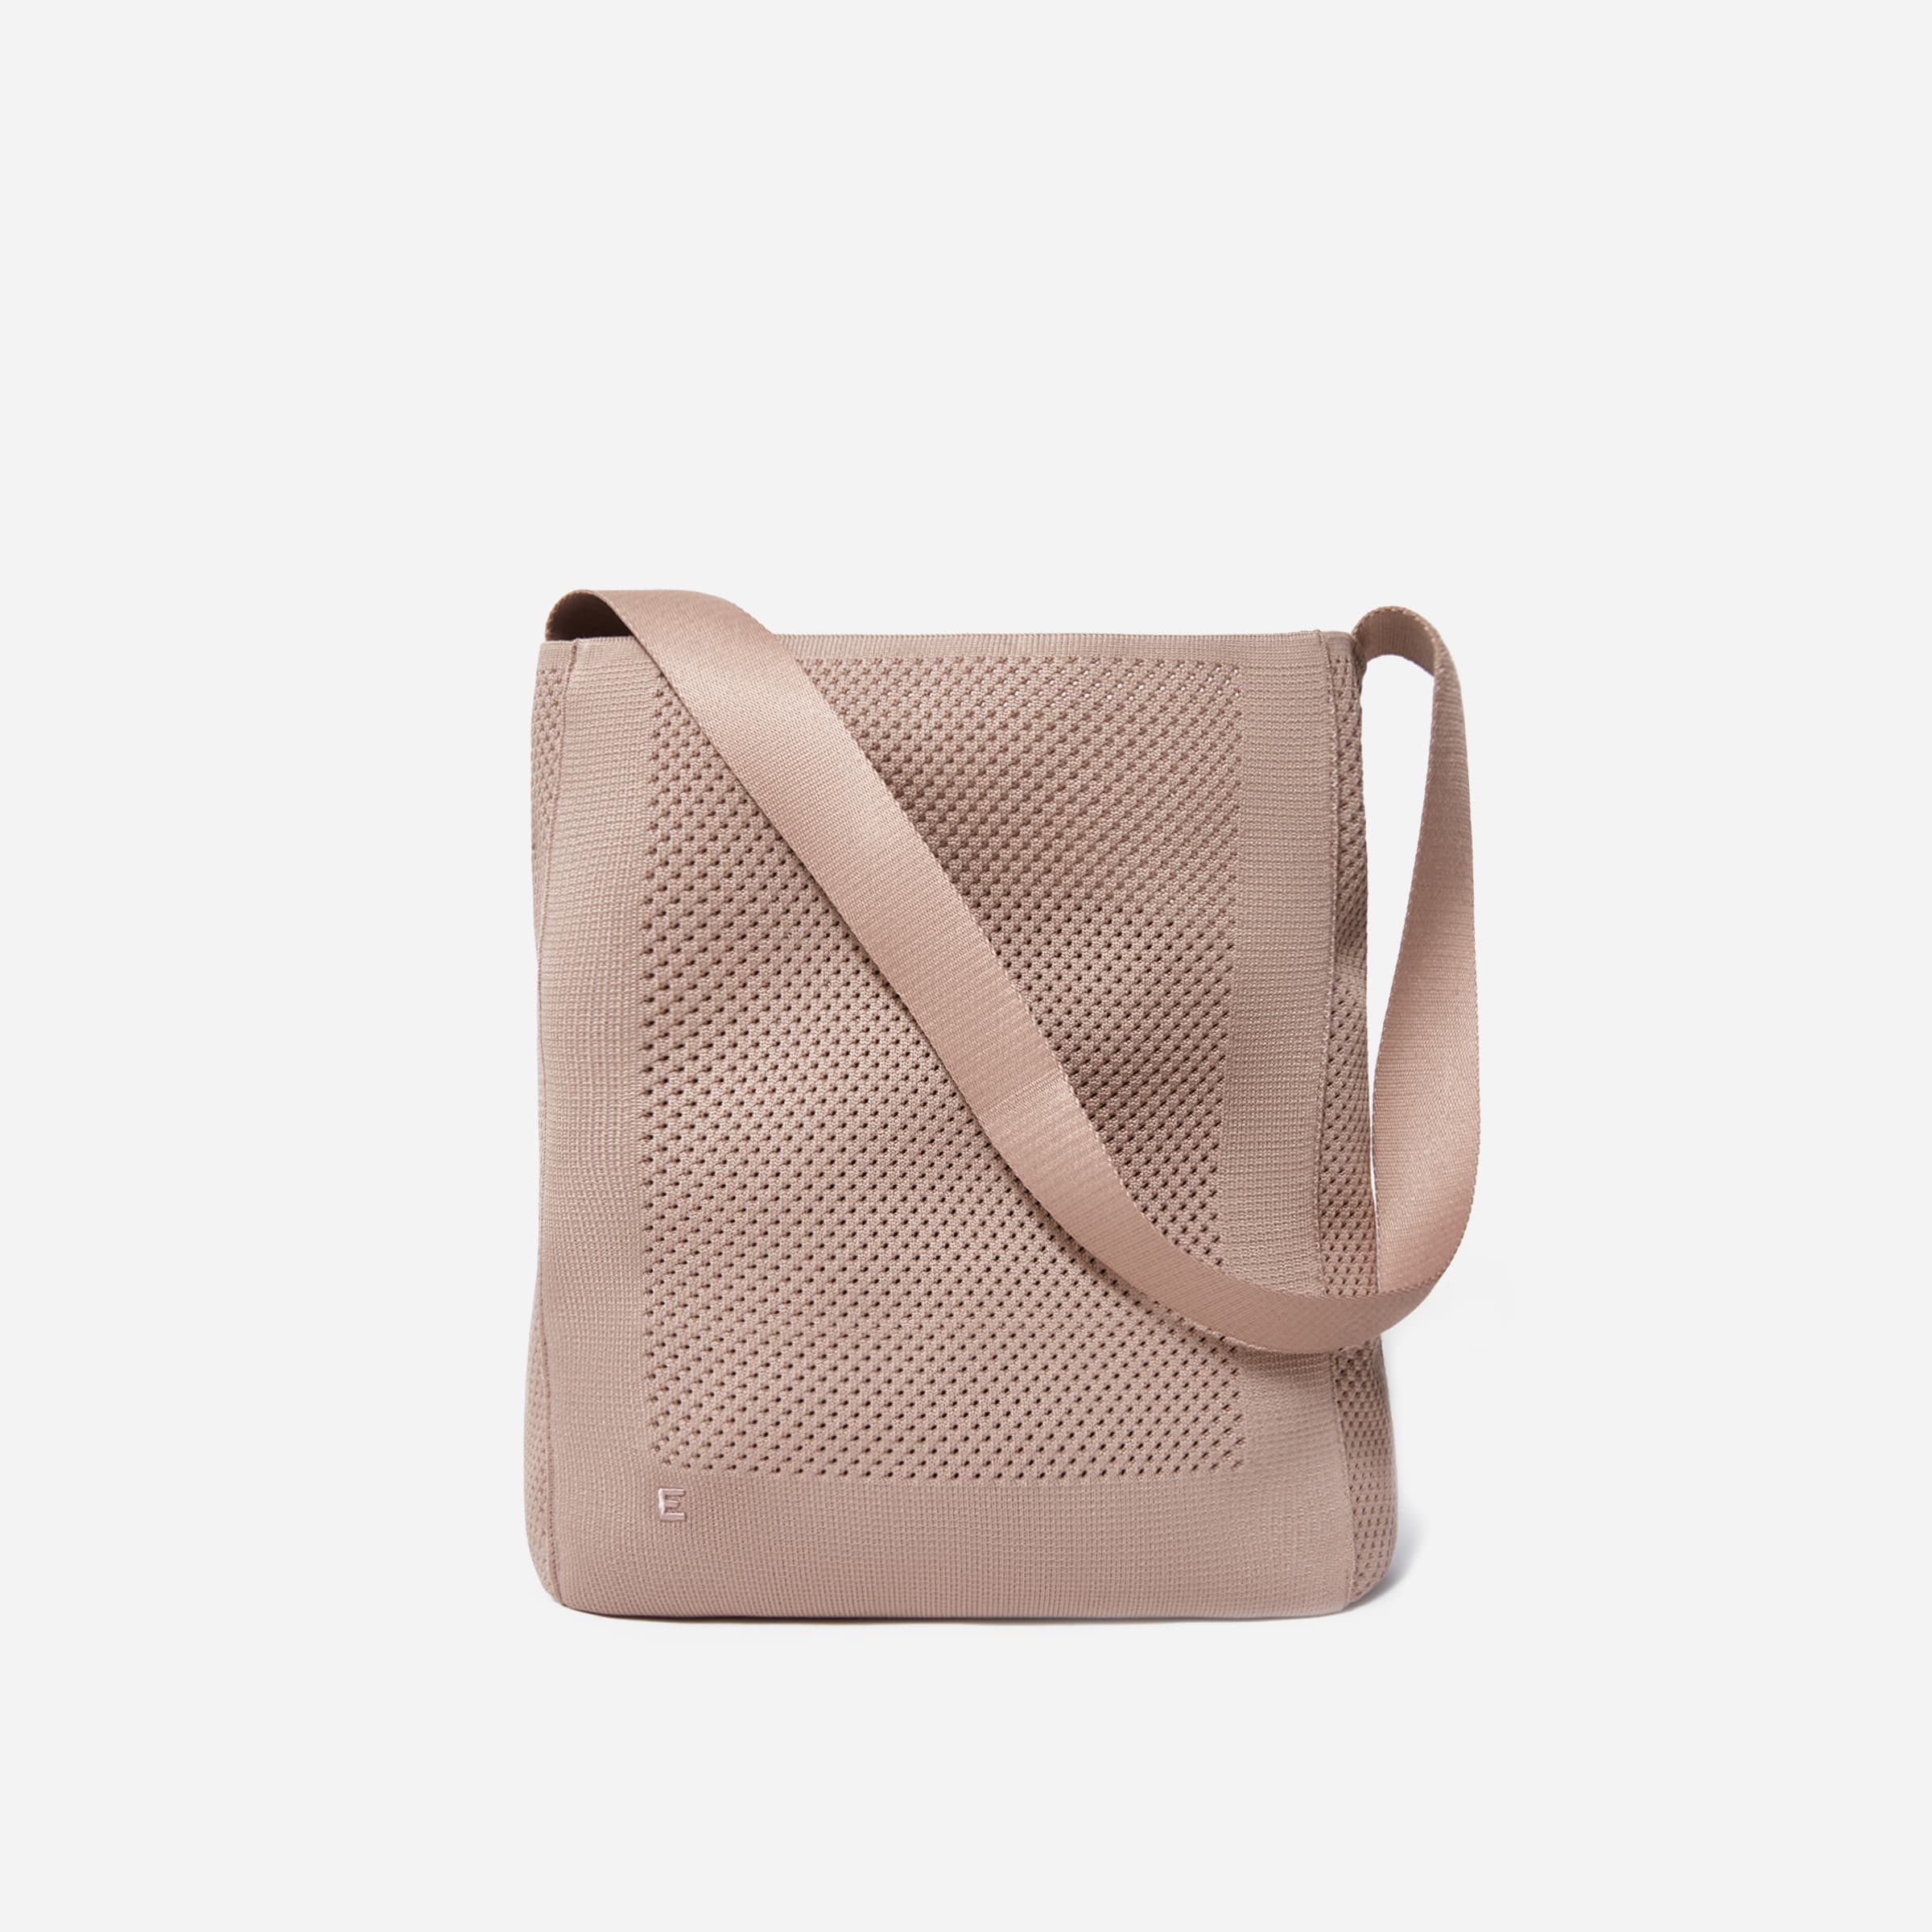 Everlane Now Making a Computer Bag That Doesn't Look Like One